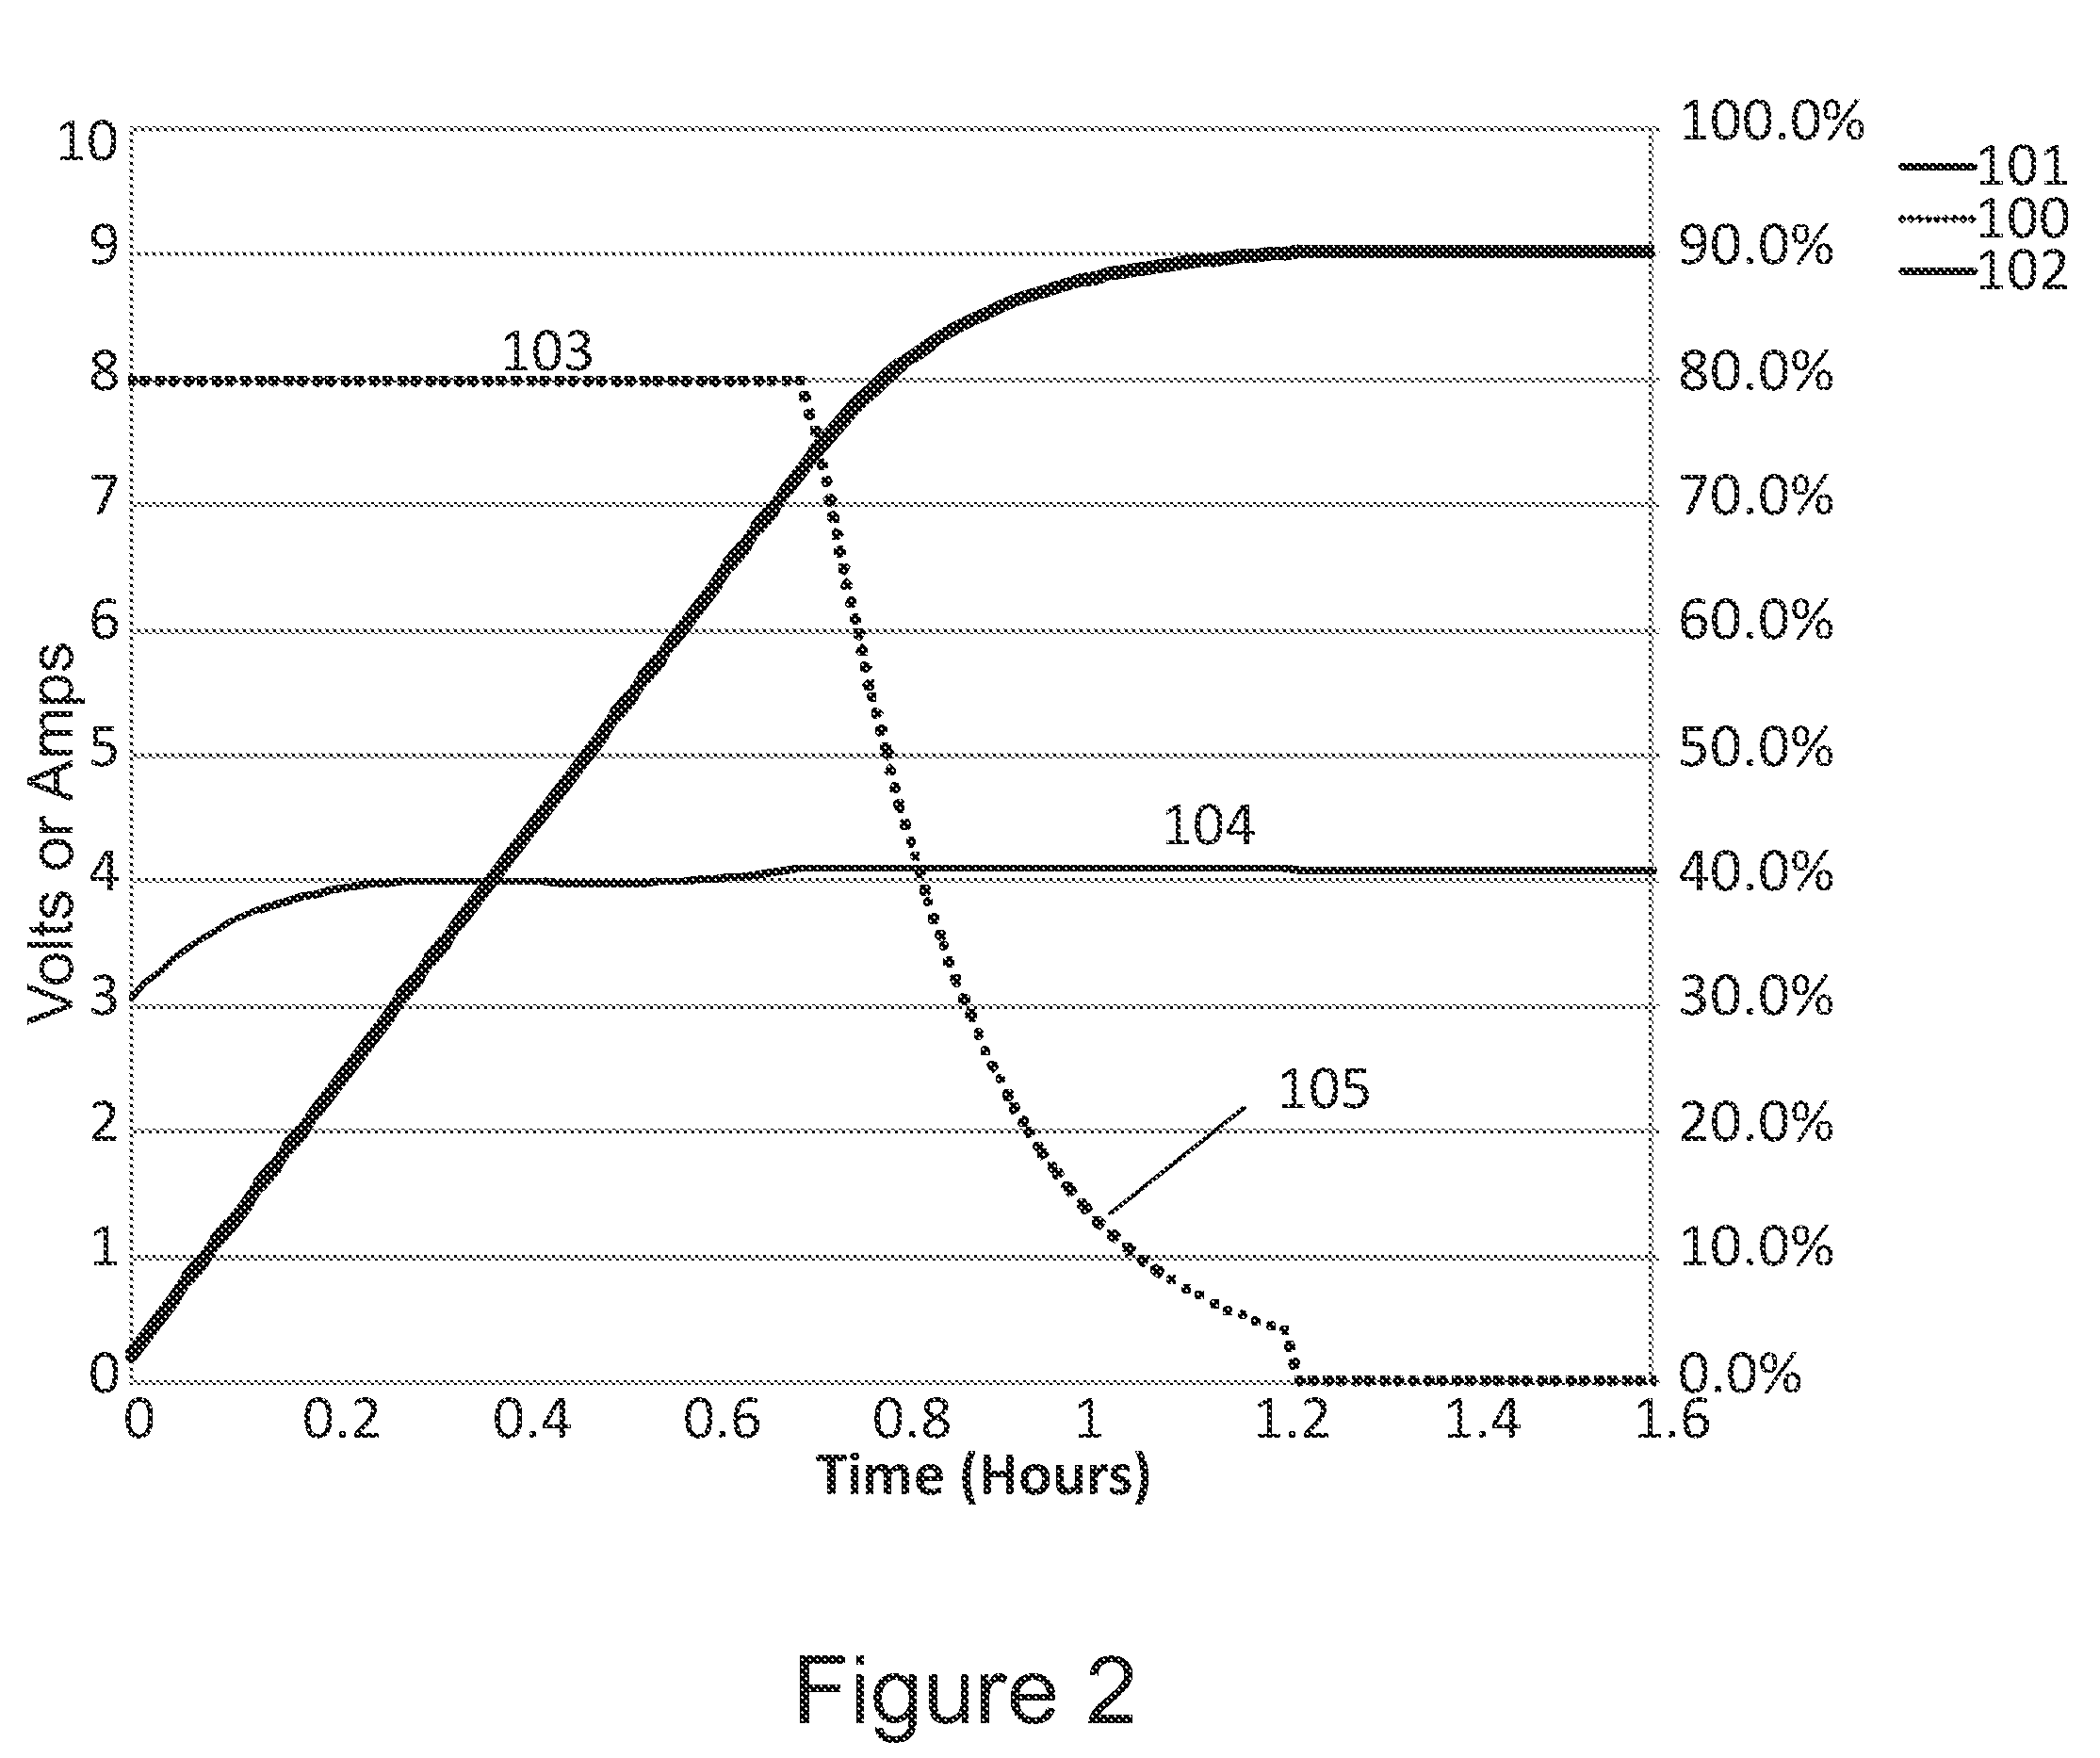 System and method of limiting degradation of the battery by prohibiting over-charge with measured temperatures